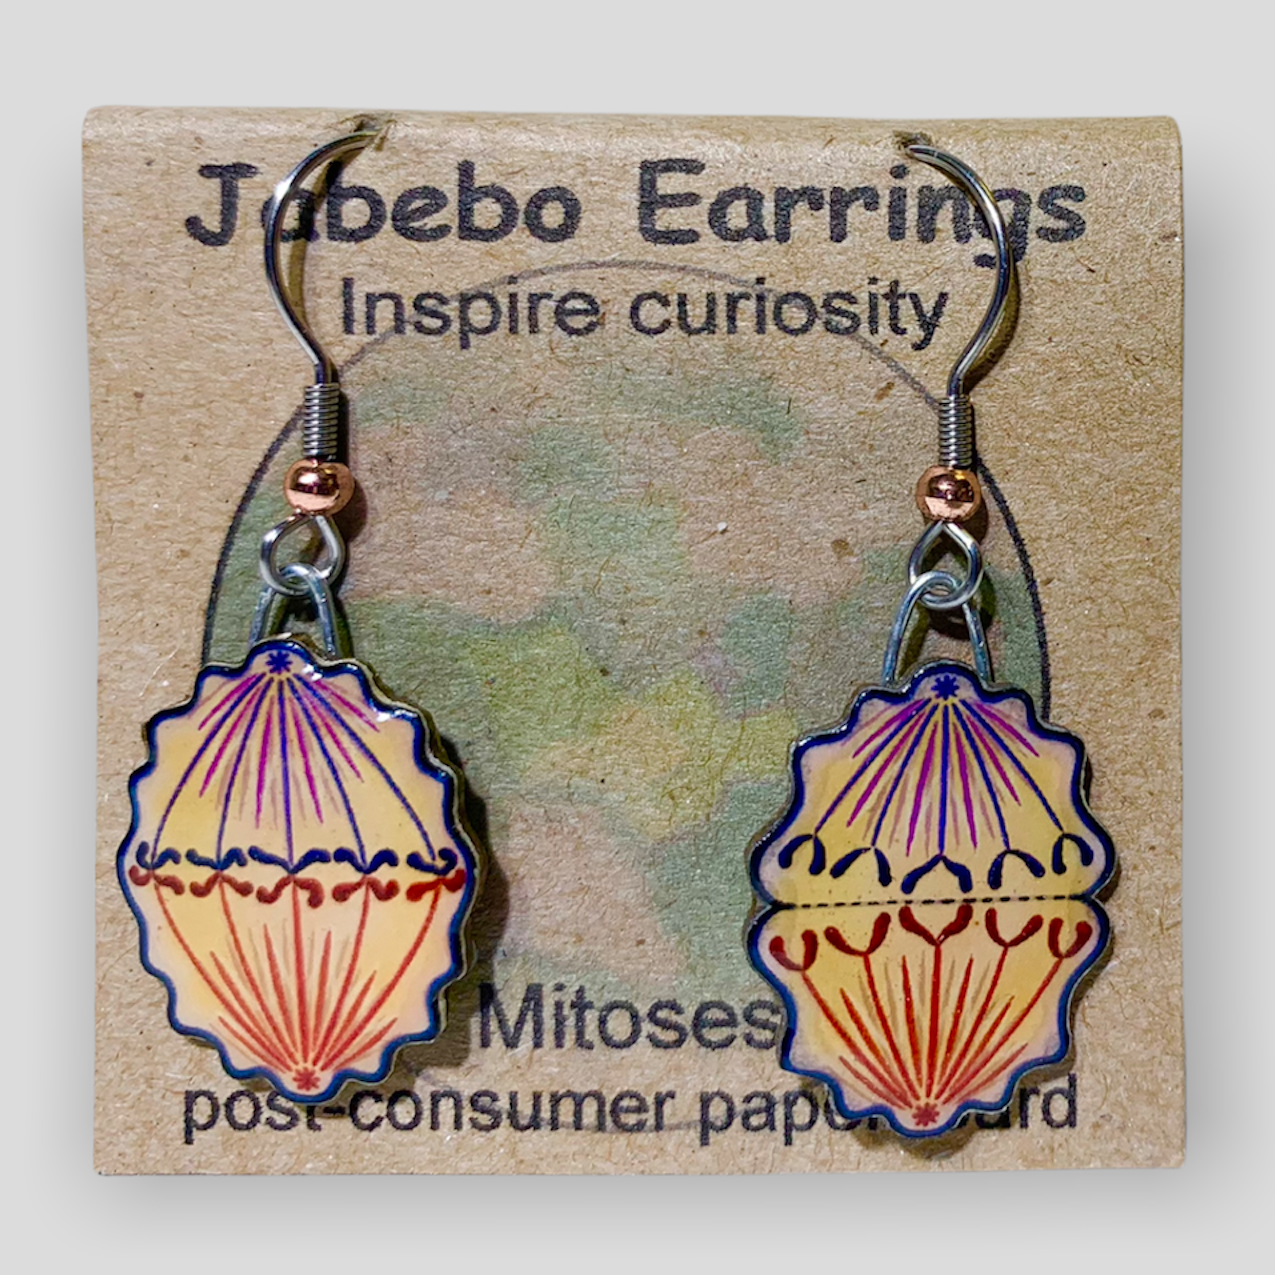 Picture shown is of 1 inch tall pair of earrings of Mitoses.